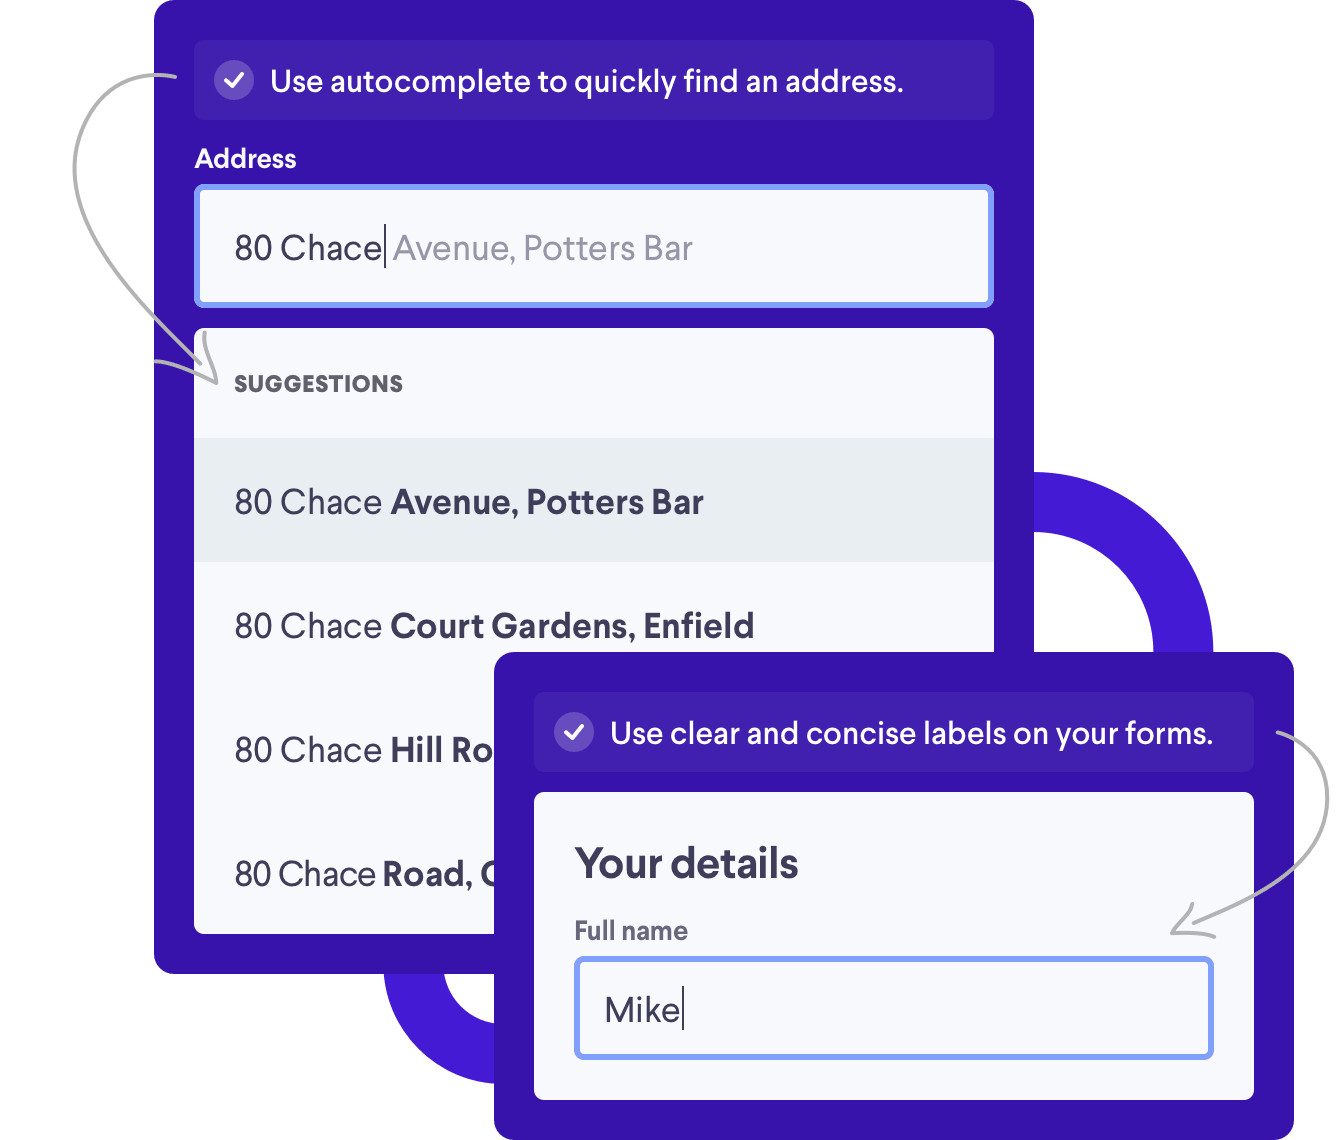 There are two examples of the types of things we look for in your product. The first example shows an example of an autocomplete address finder, which is great for helping user find an address quickly. The second example shows how using a full label on your form inputs can remove any confusion about the information required.